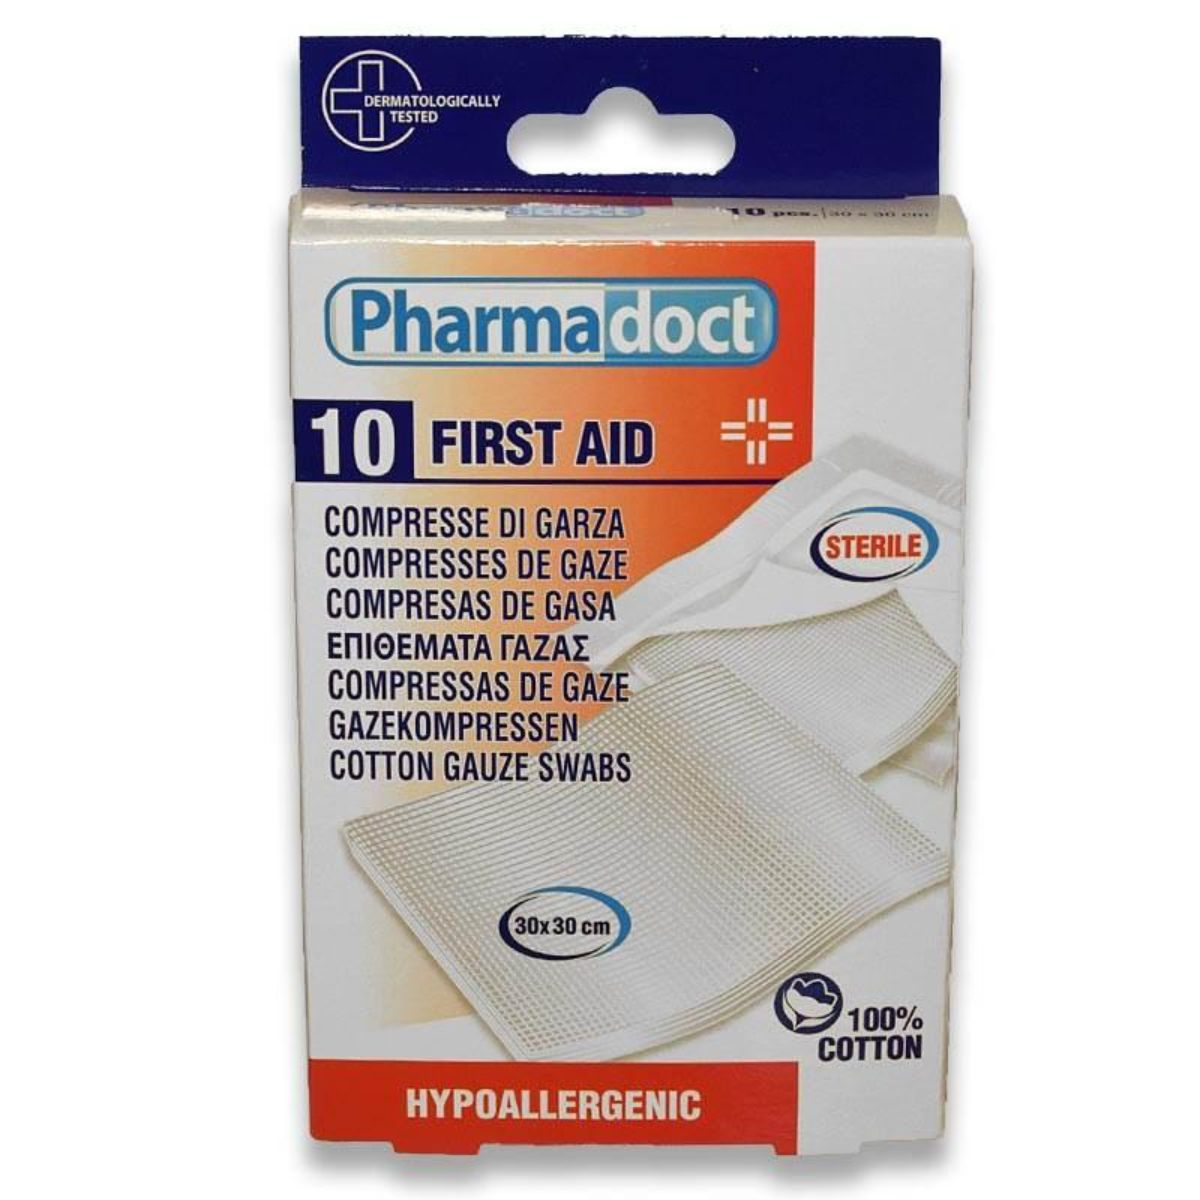 Comprese sterile din bumbac, Pharmadoct First Aid, 10 Buc 30 x 30 cm absorbante